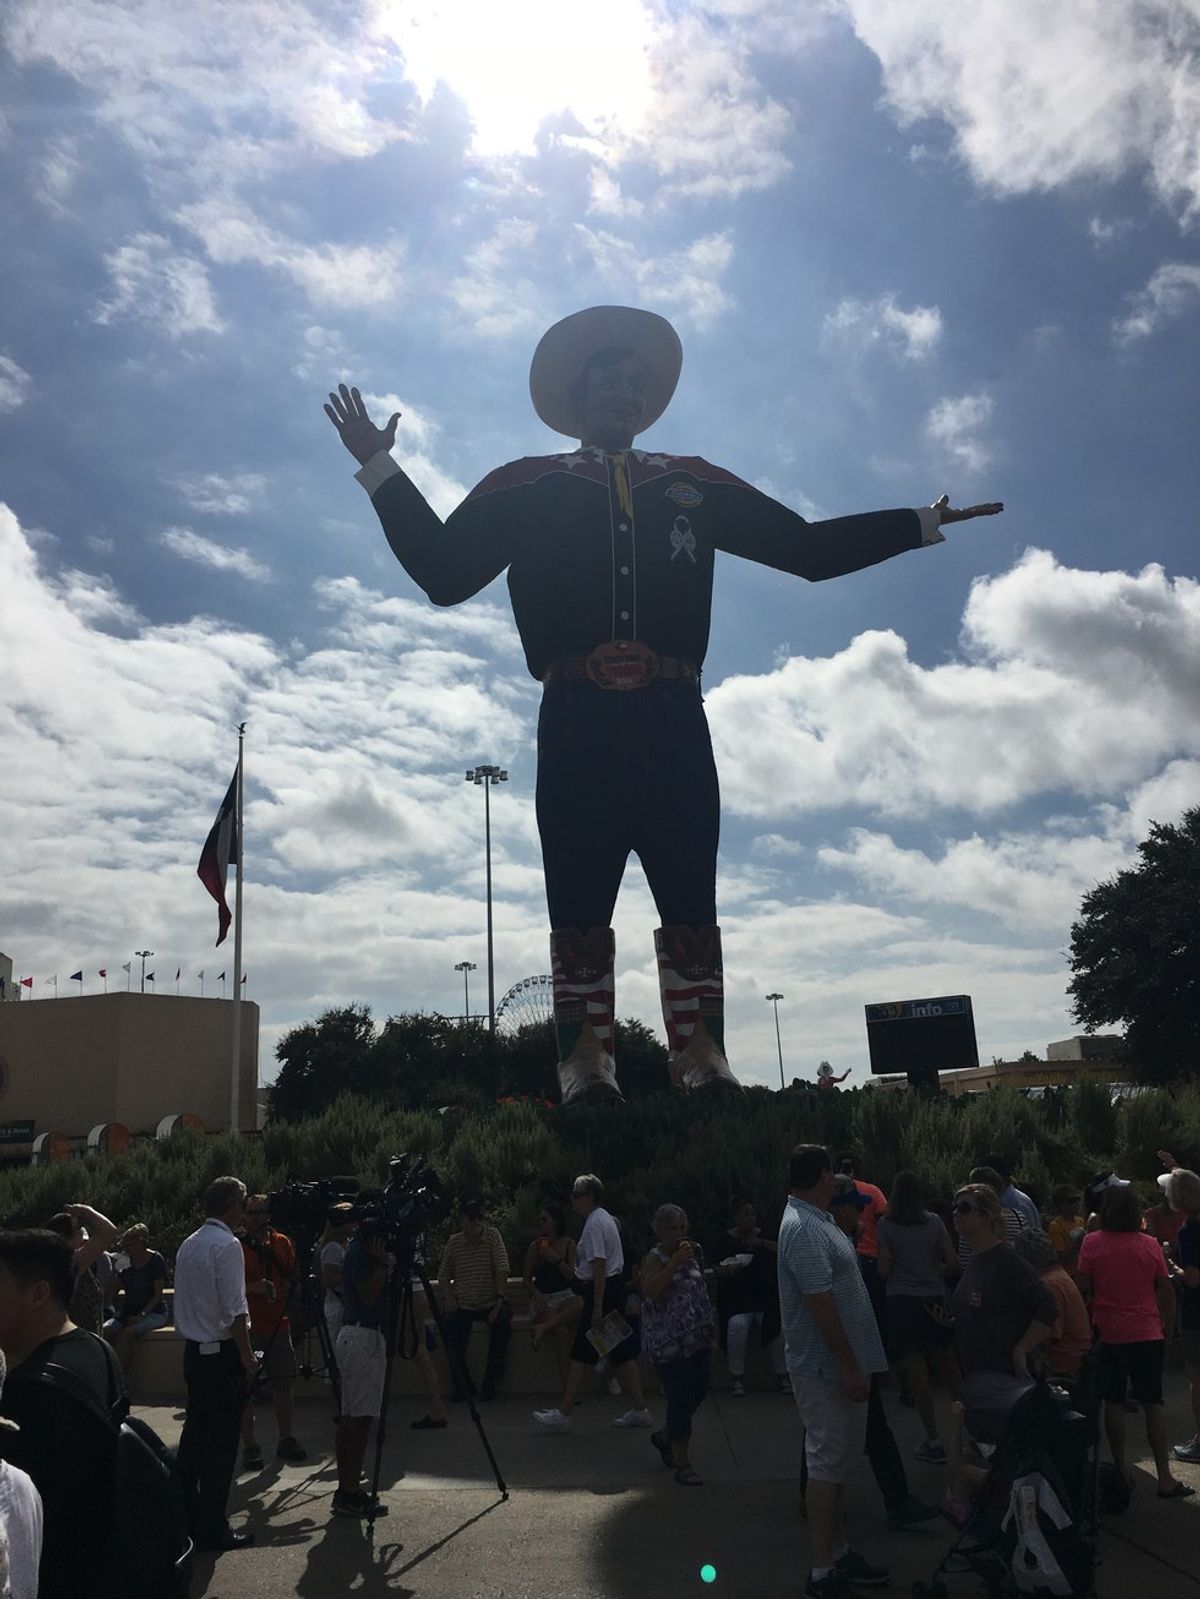 Check Out The Great Texas State Fair!